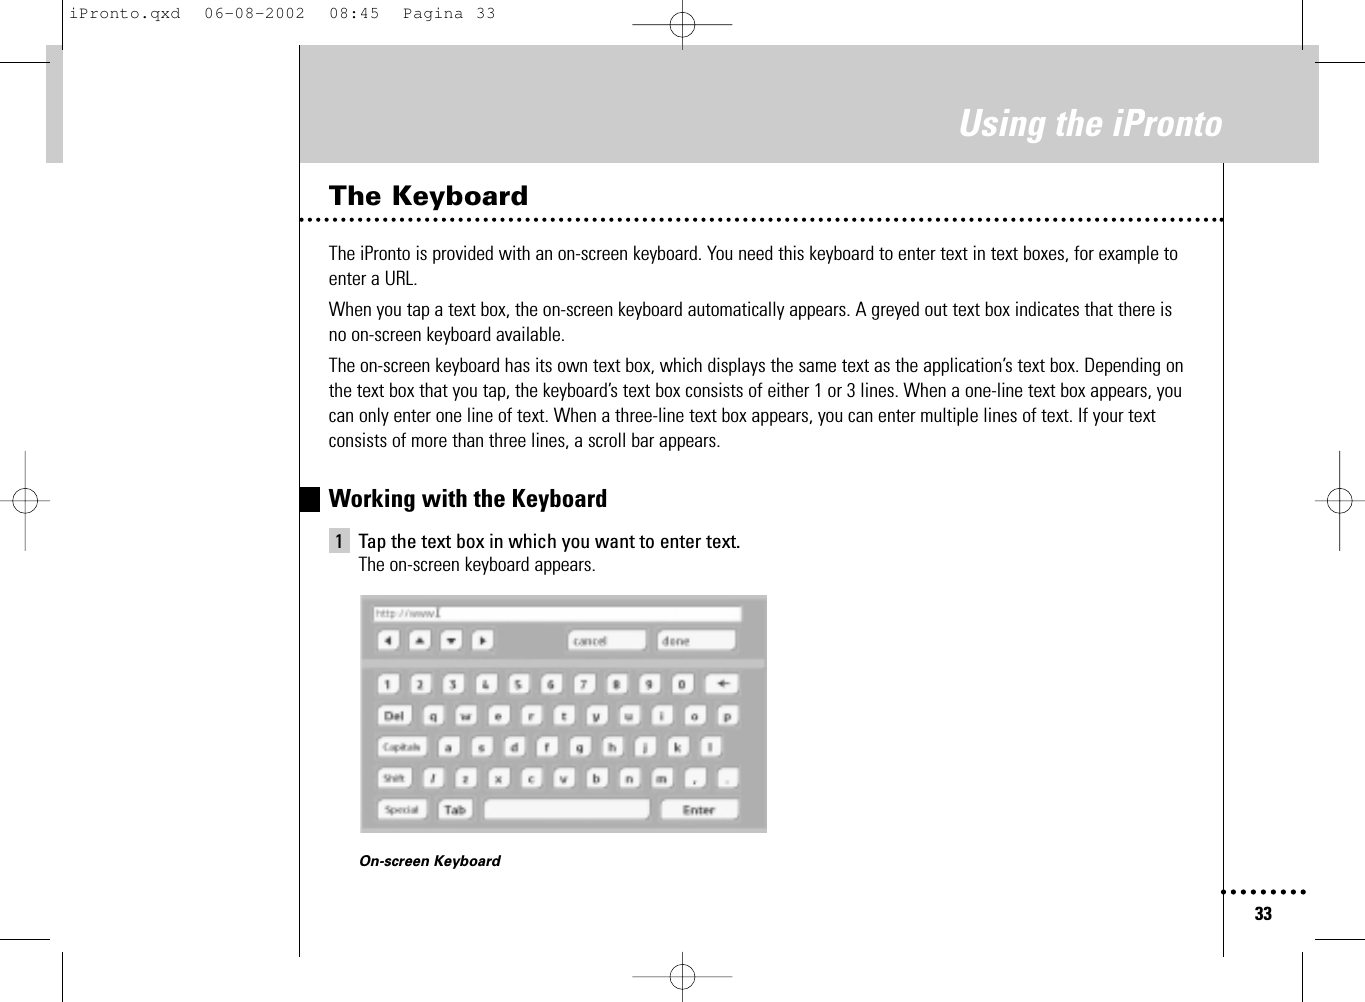 33Using the iProntoThe KeyboardThe iPronto is provided with an on-screen keyboard. You need this keyboard to enter text in text boxes, for example toenter a URL.When you tap a text box, the on-screen keyboard automatically appears. A greyed out text box indicates that there isno on-screen keyboard available.The on-screen keyboard has its own text box, which displays the same text as the application’s text box. Depending onthe text box that you tap, the keyboard’s text box consists of either 1 or 3 lines. When a one-line text box appears, youcan only enter one line of text. When a three-line text box appears, you can enter multiple lines of text. If your textconsists of more than three lines, a scroll bar appears.Working with the Keyboard1 Tap the text box in which you want to enter text.The on-screen keyboard appears.On-screen KeyboardiPronto.qxd  06-08-2002  08:45  Pagina 33